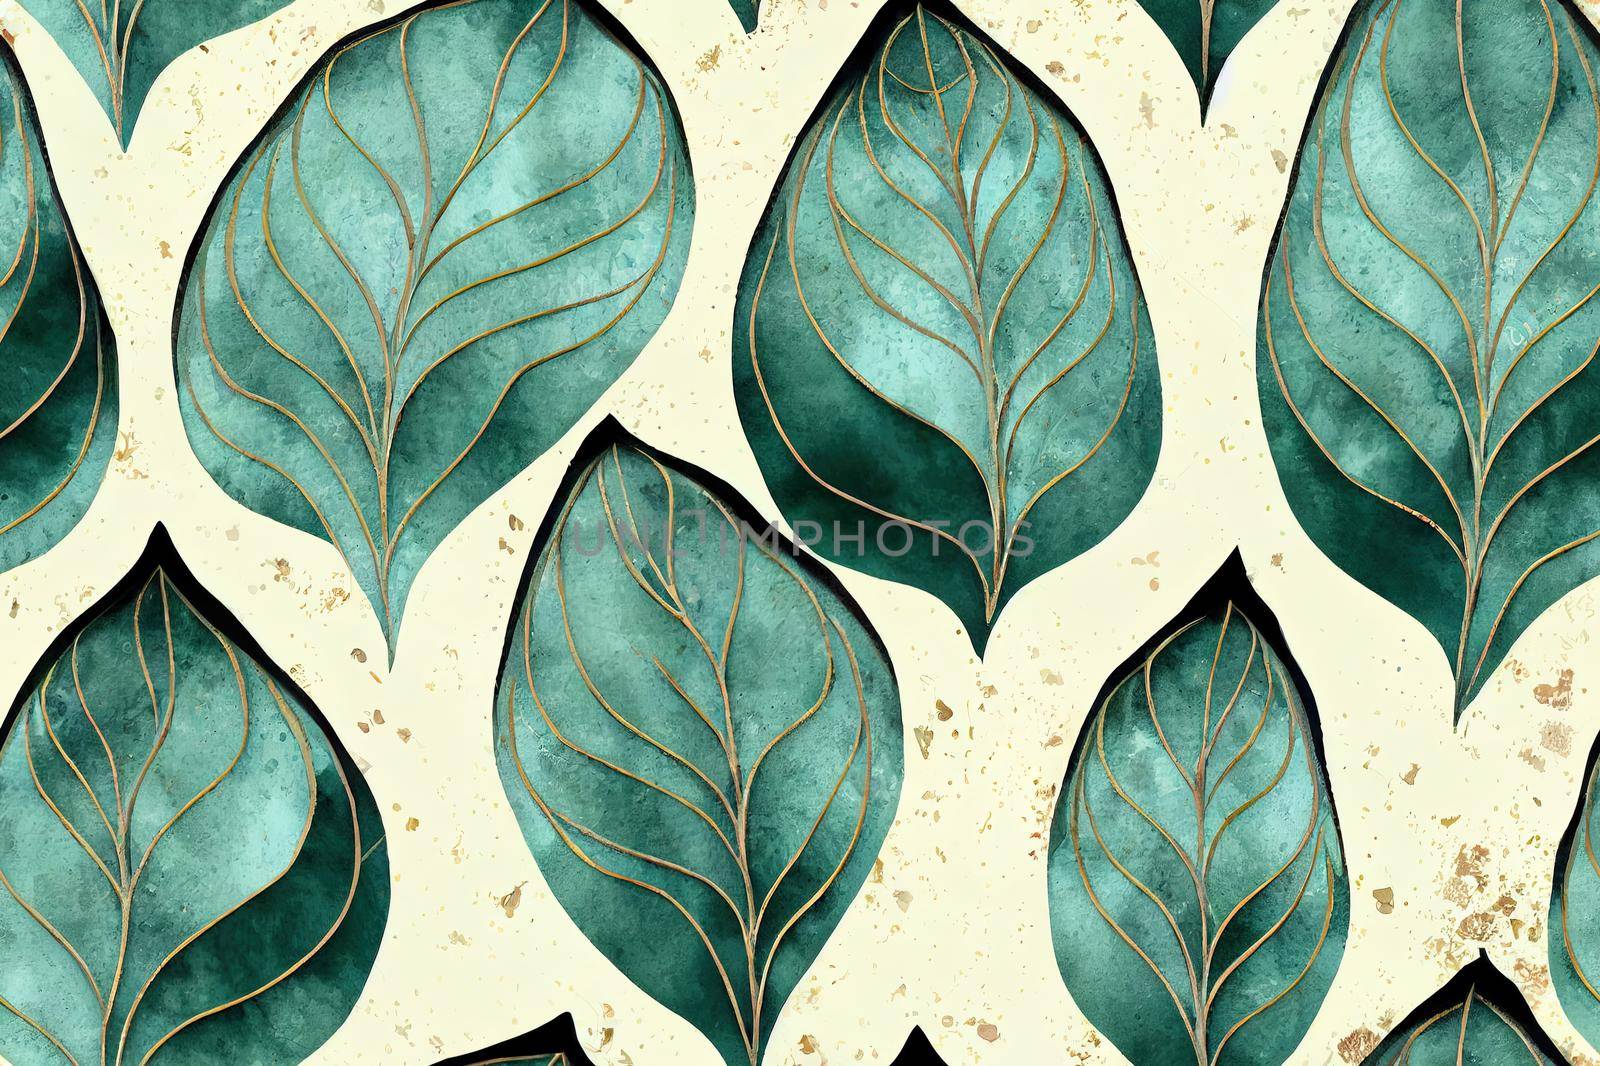 Imprints abstract ornate tender leaves mix repeat seamless pattern. Digital hand drawn picture with watercolour texture. Mixed media artwork. Endless motif for textile decor and botanical design. High quality illustration